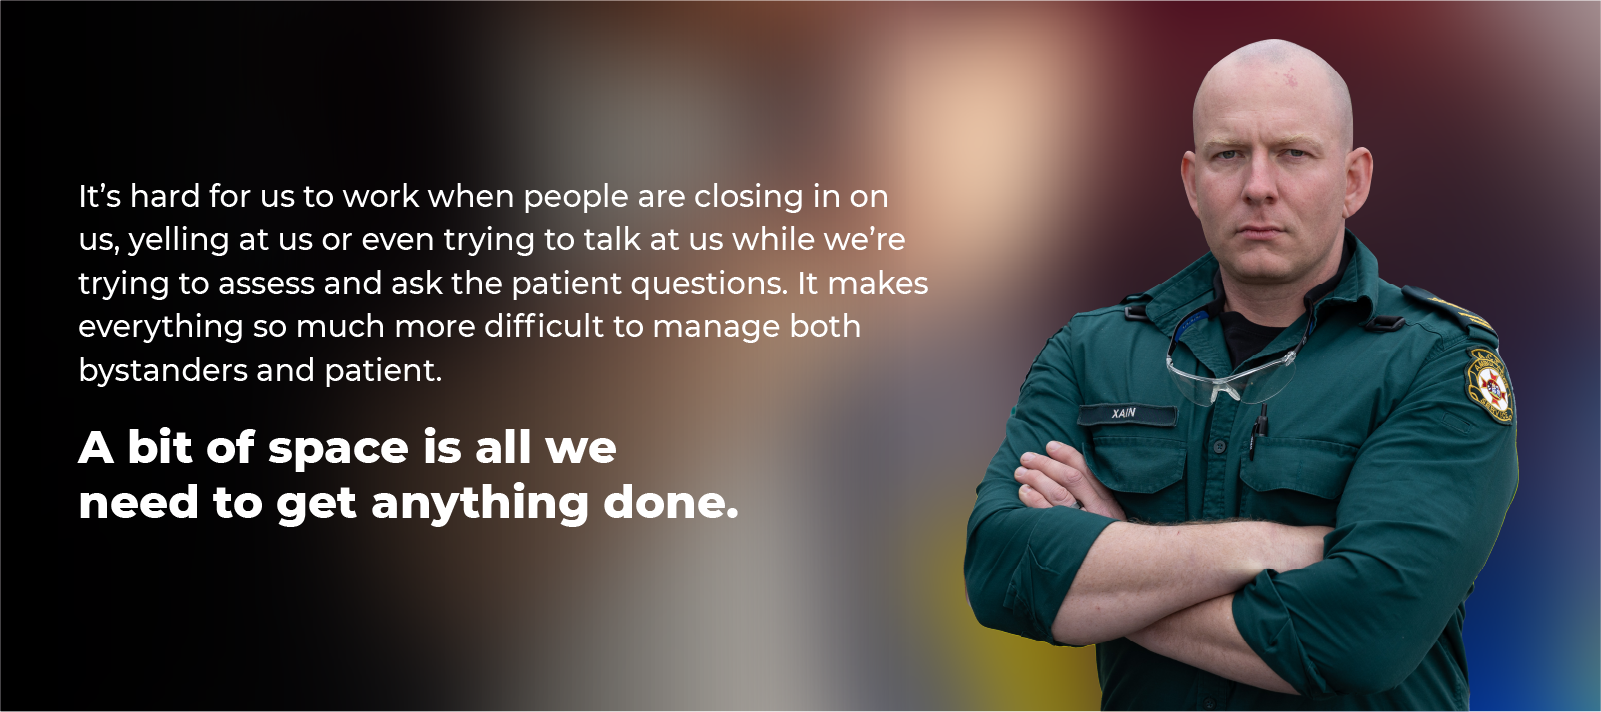 Our Stories-banner image with a male paramedic and accompanying text